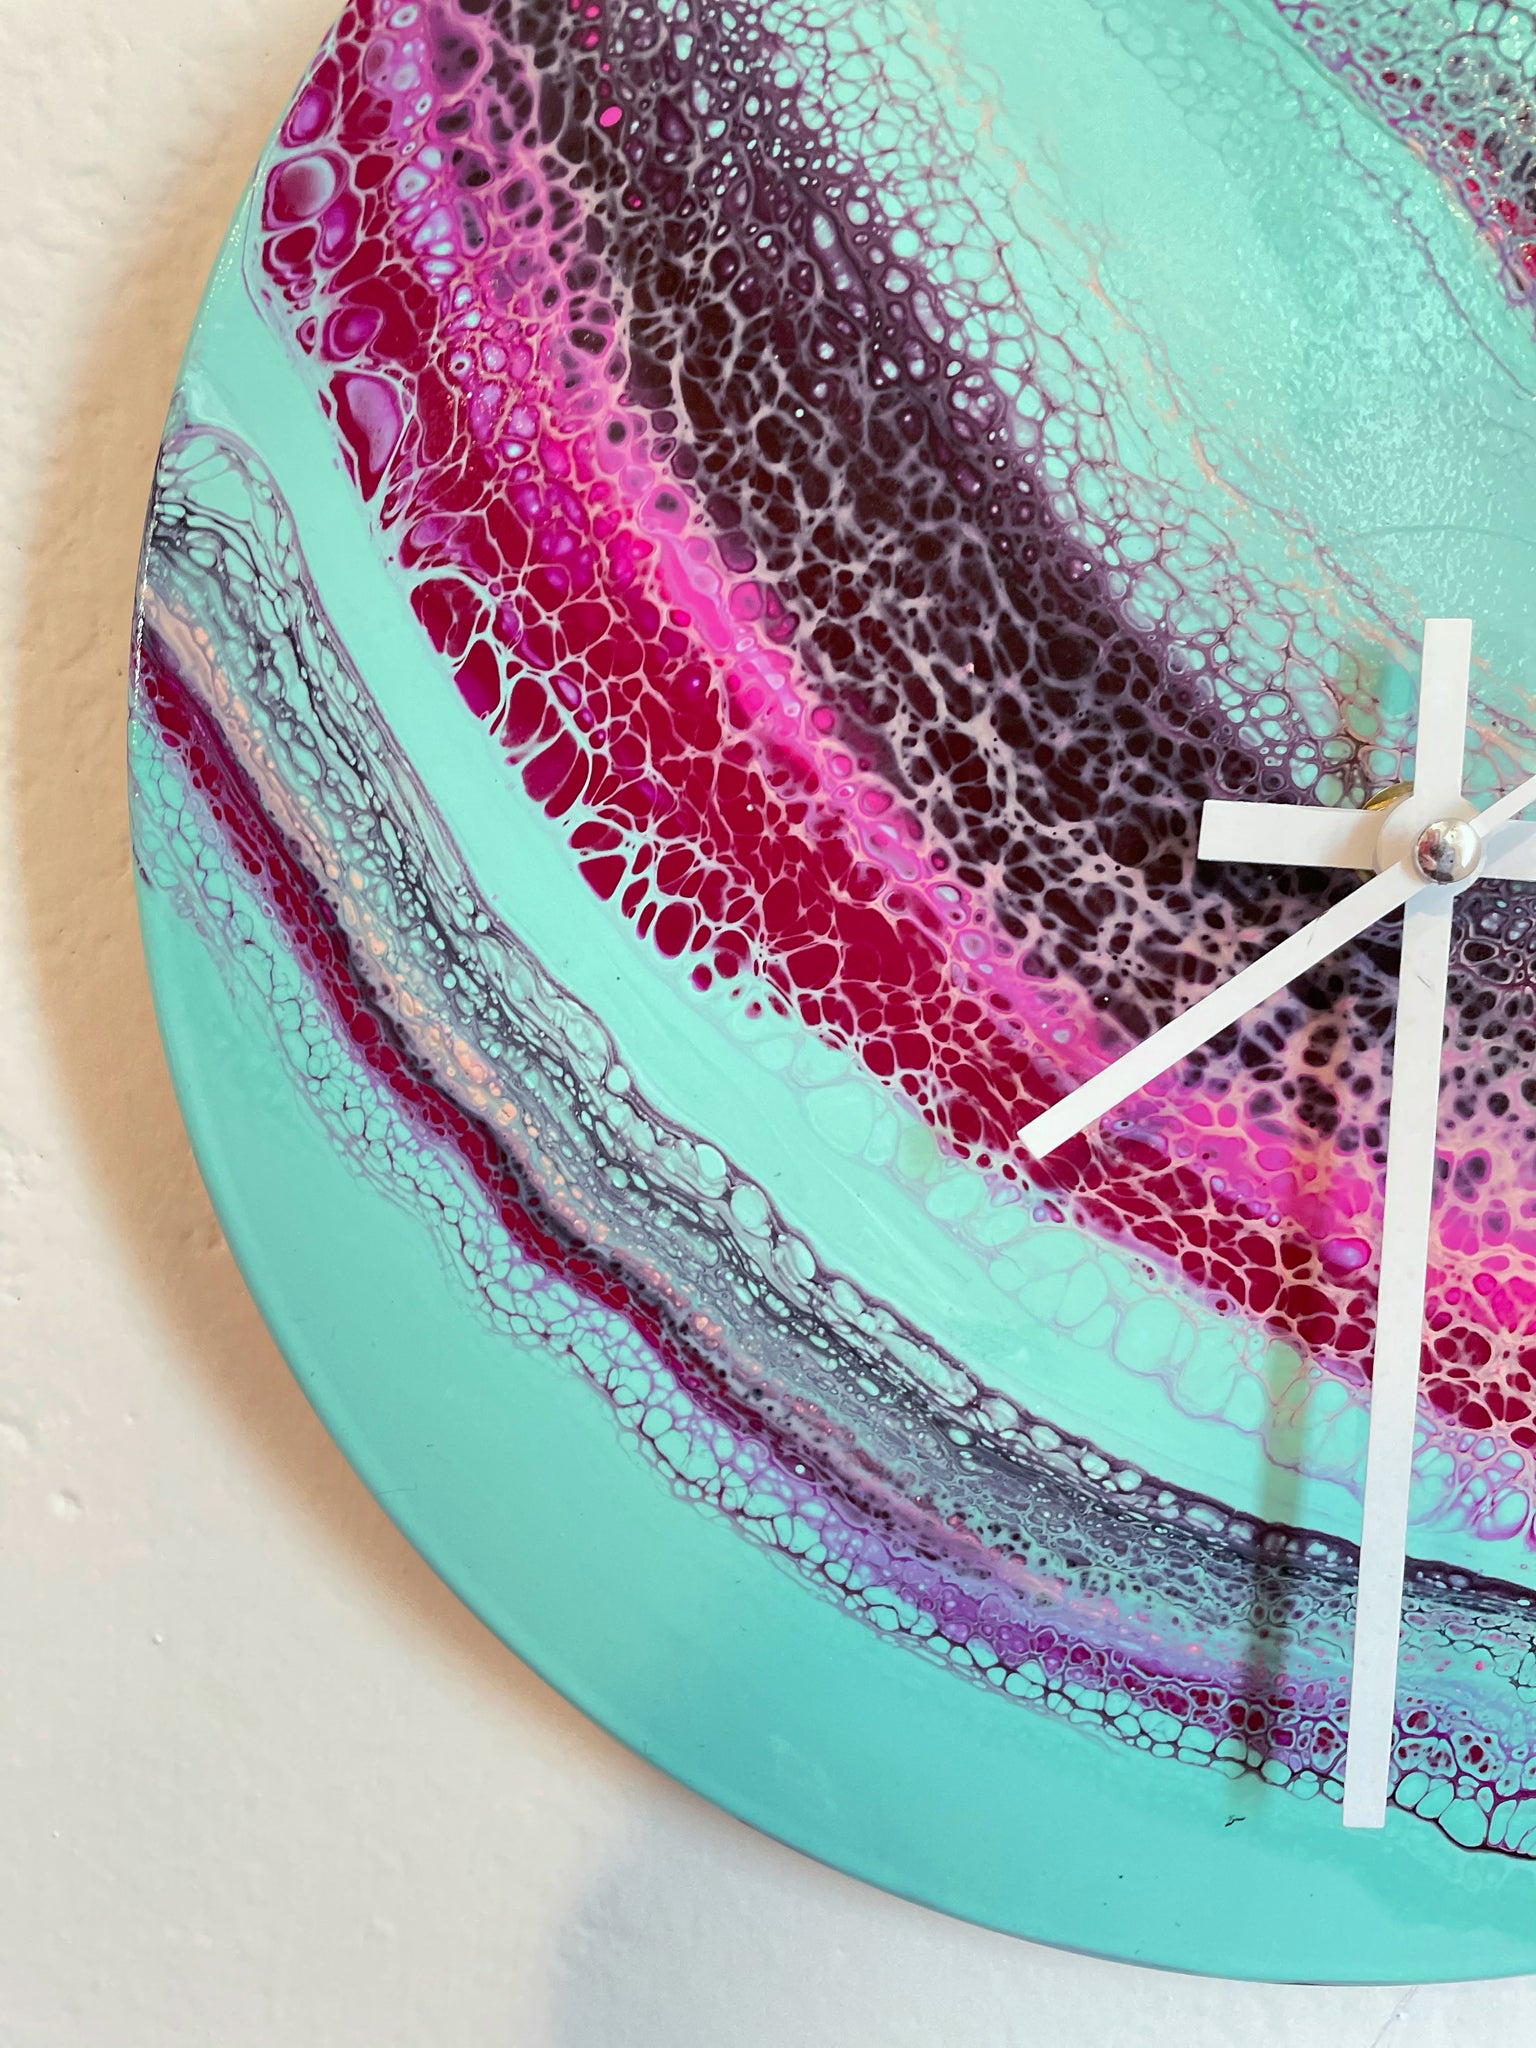 Seascape - Upcycled Vinyl Record Pour Painting Clock